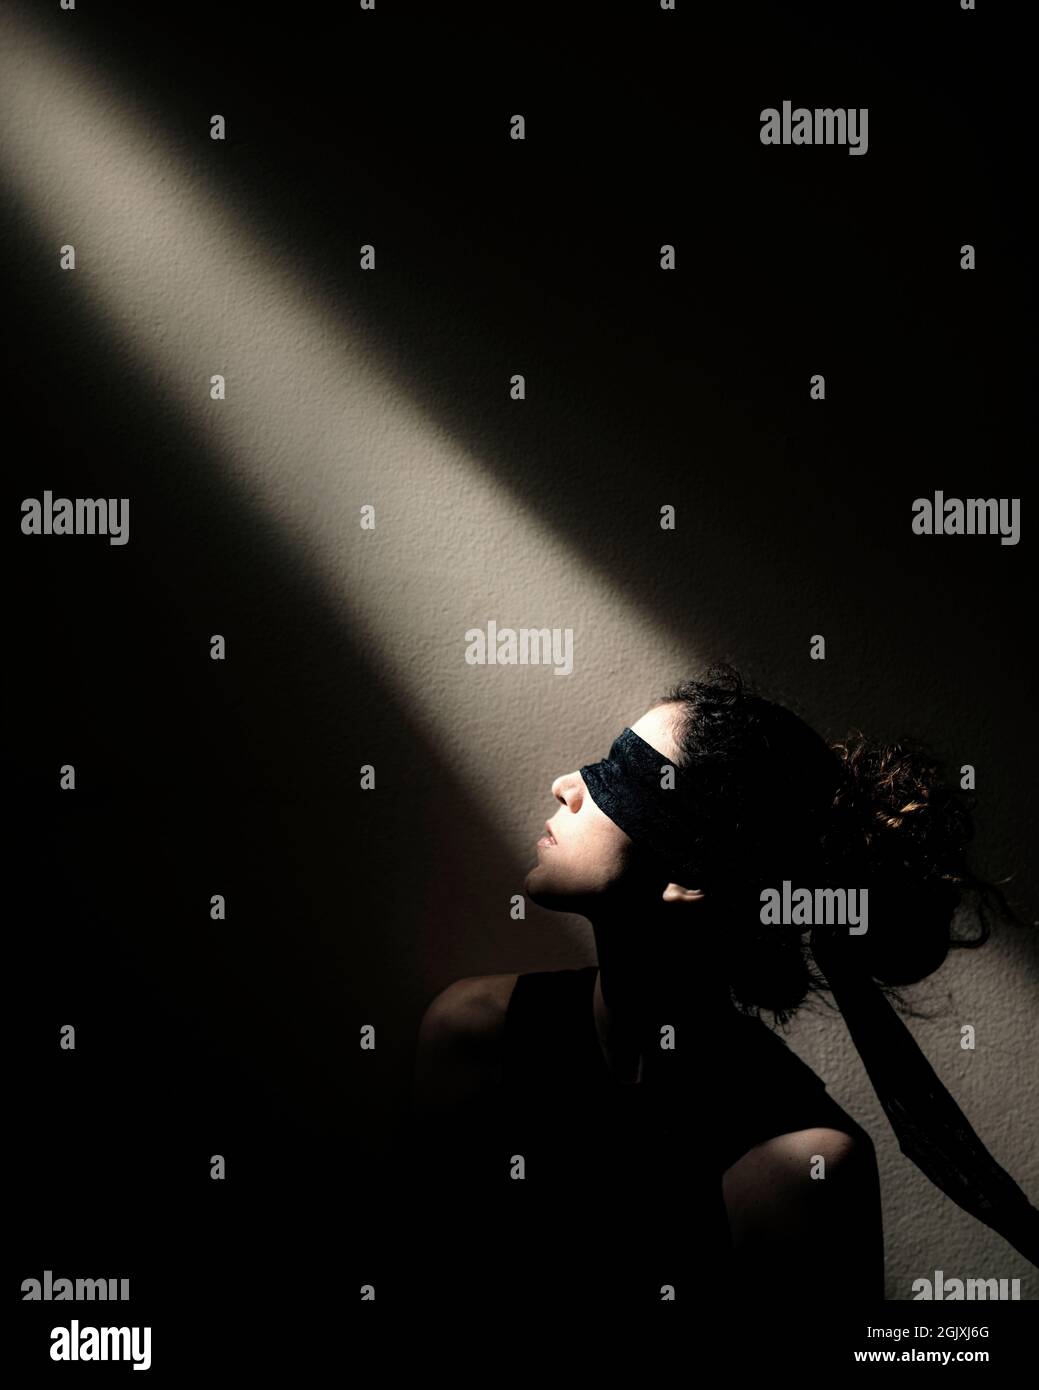 Blindfolded woman 'looks' at a beam of light - Searching for your vision Stock Photo